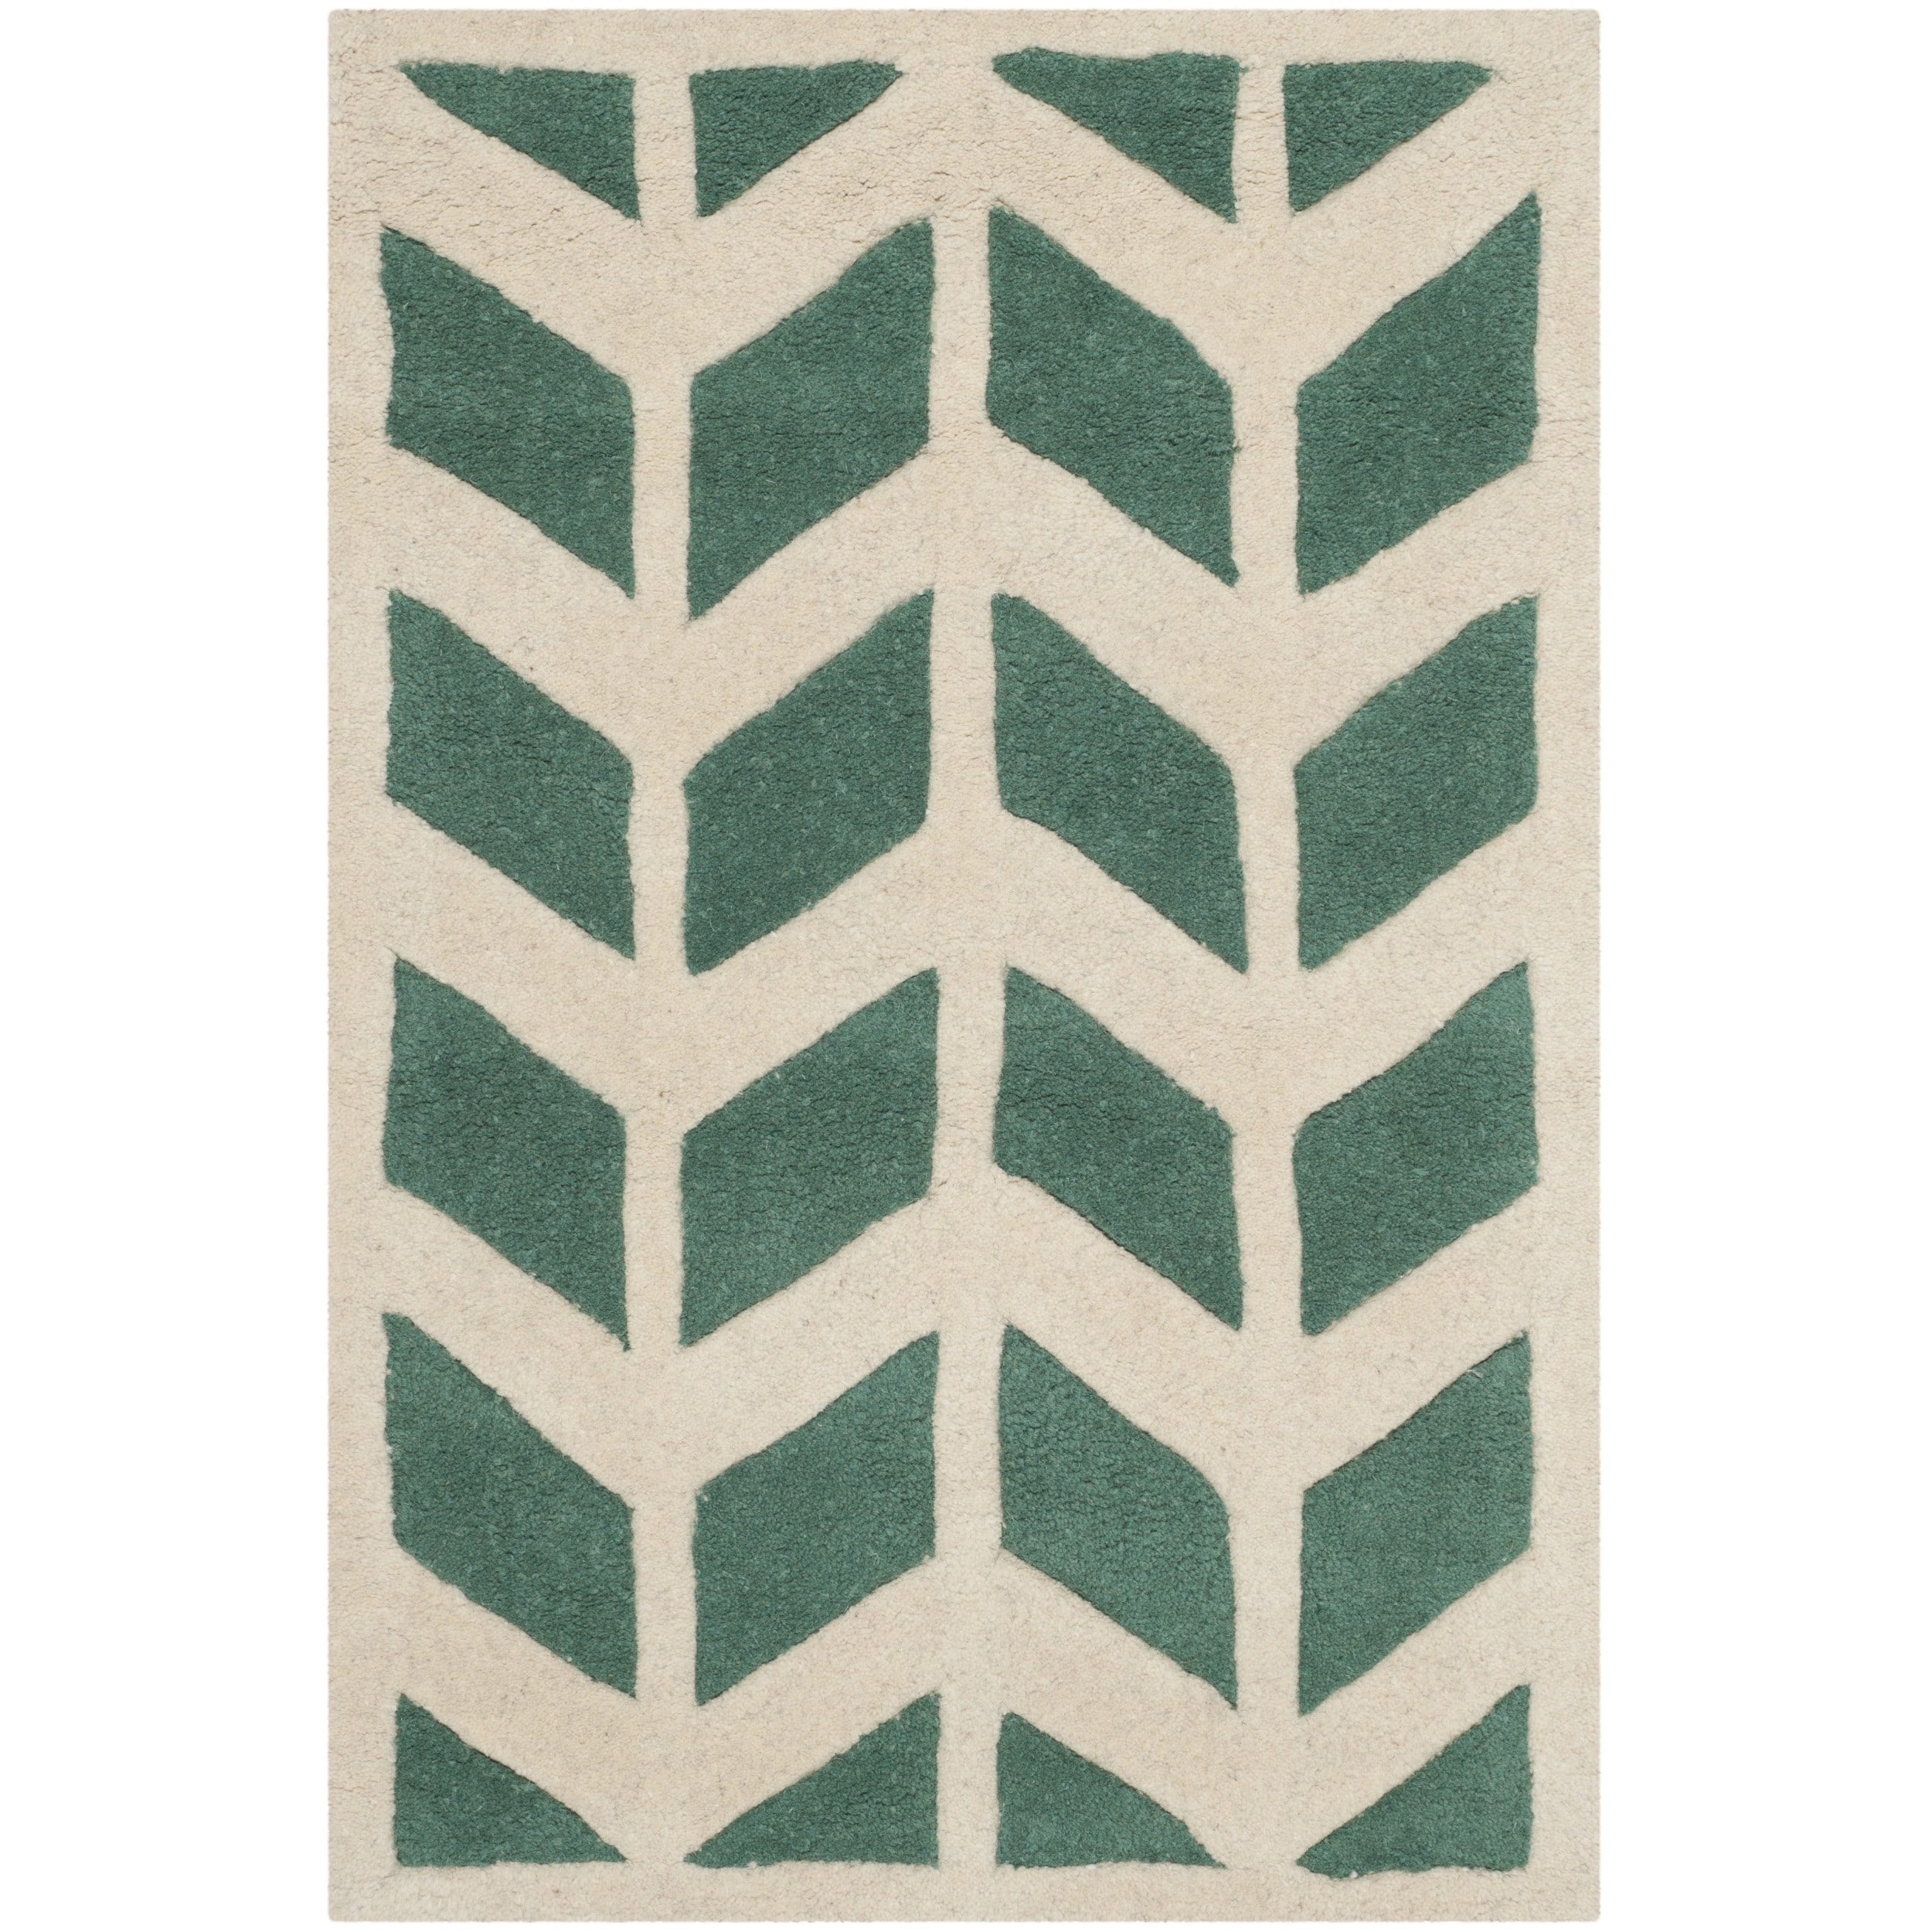 Safavieh Handmade Moroccan Chatham Teal/ Ivory Wool Accent Rug (2 X 3)